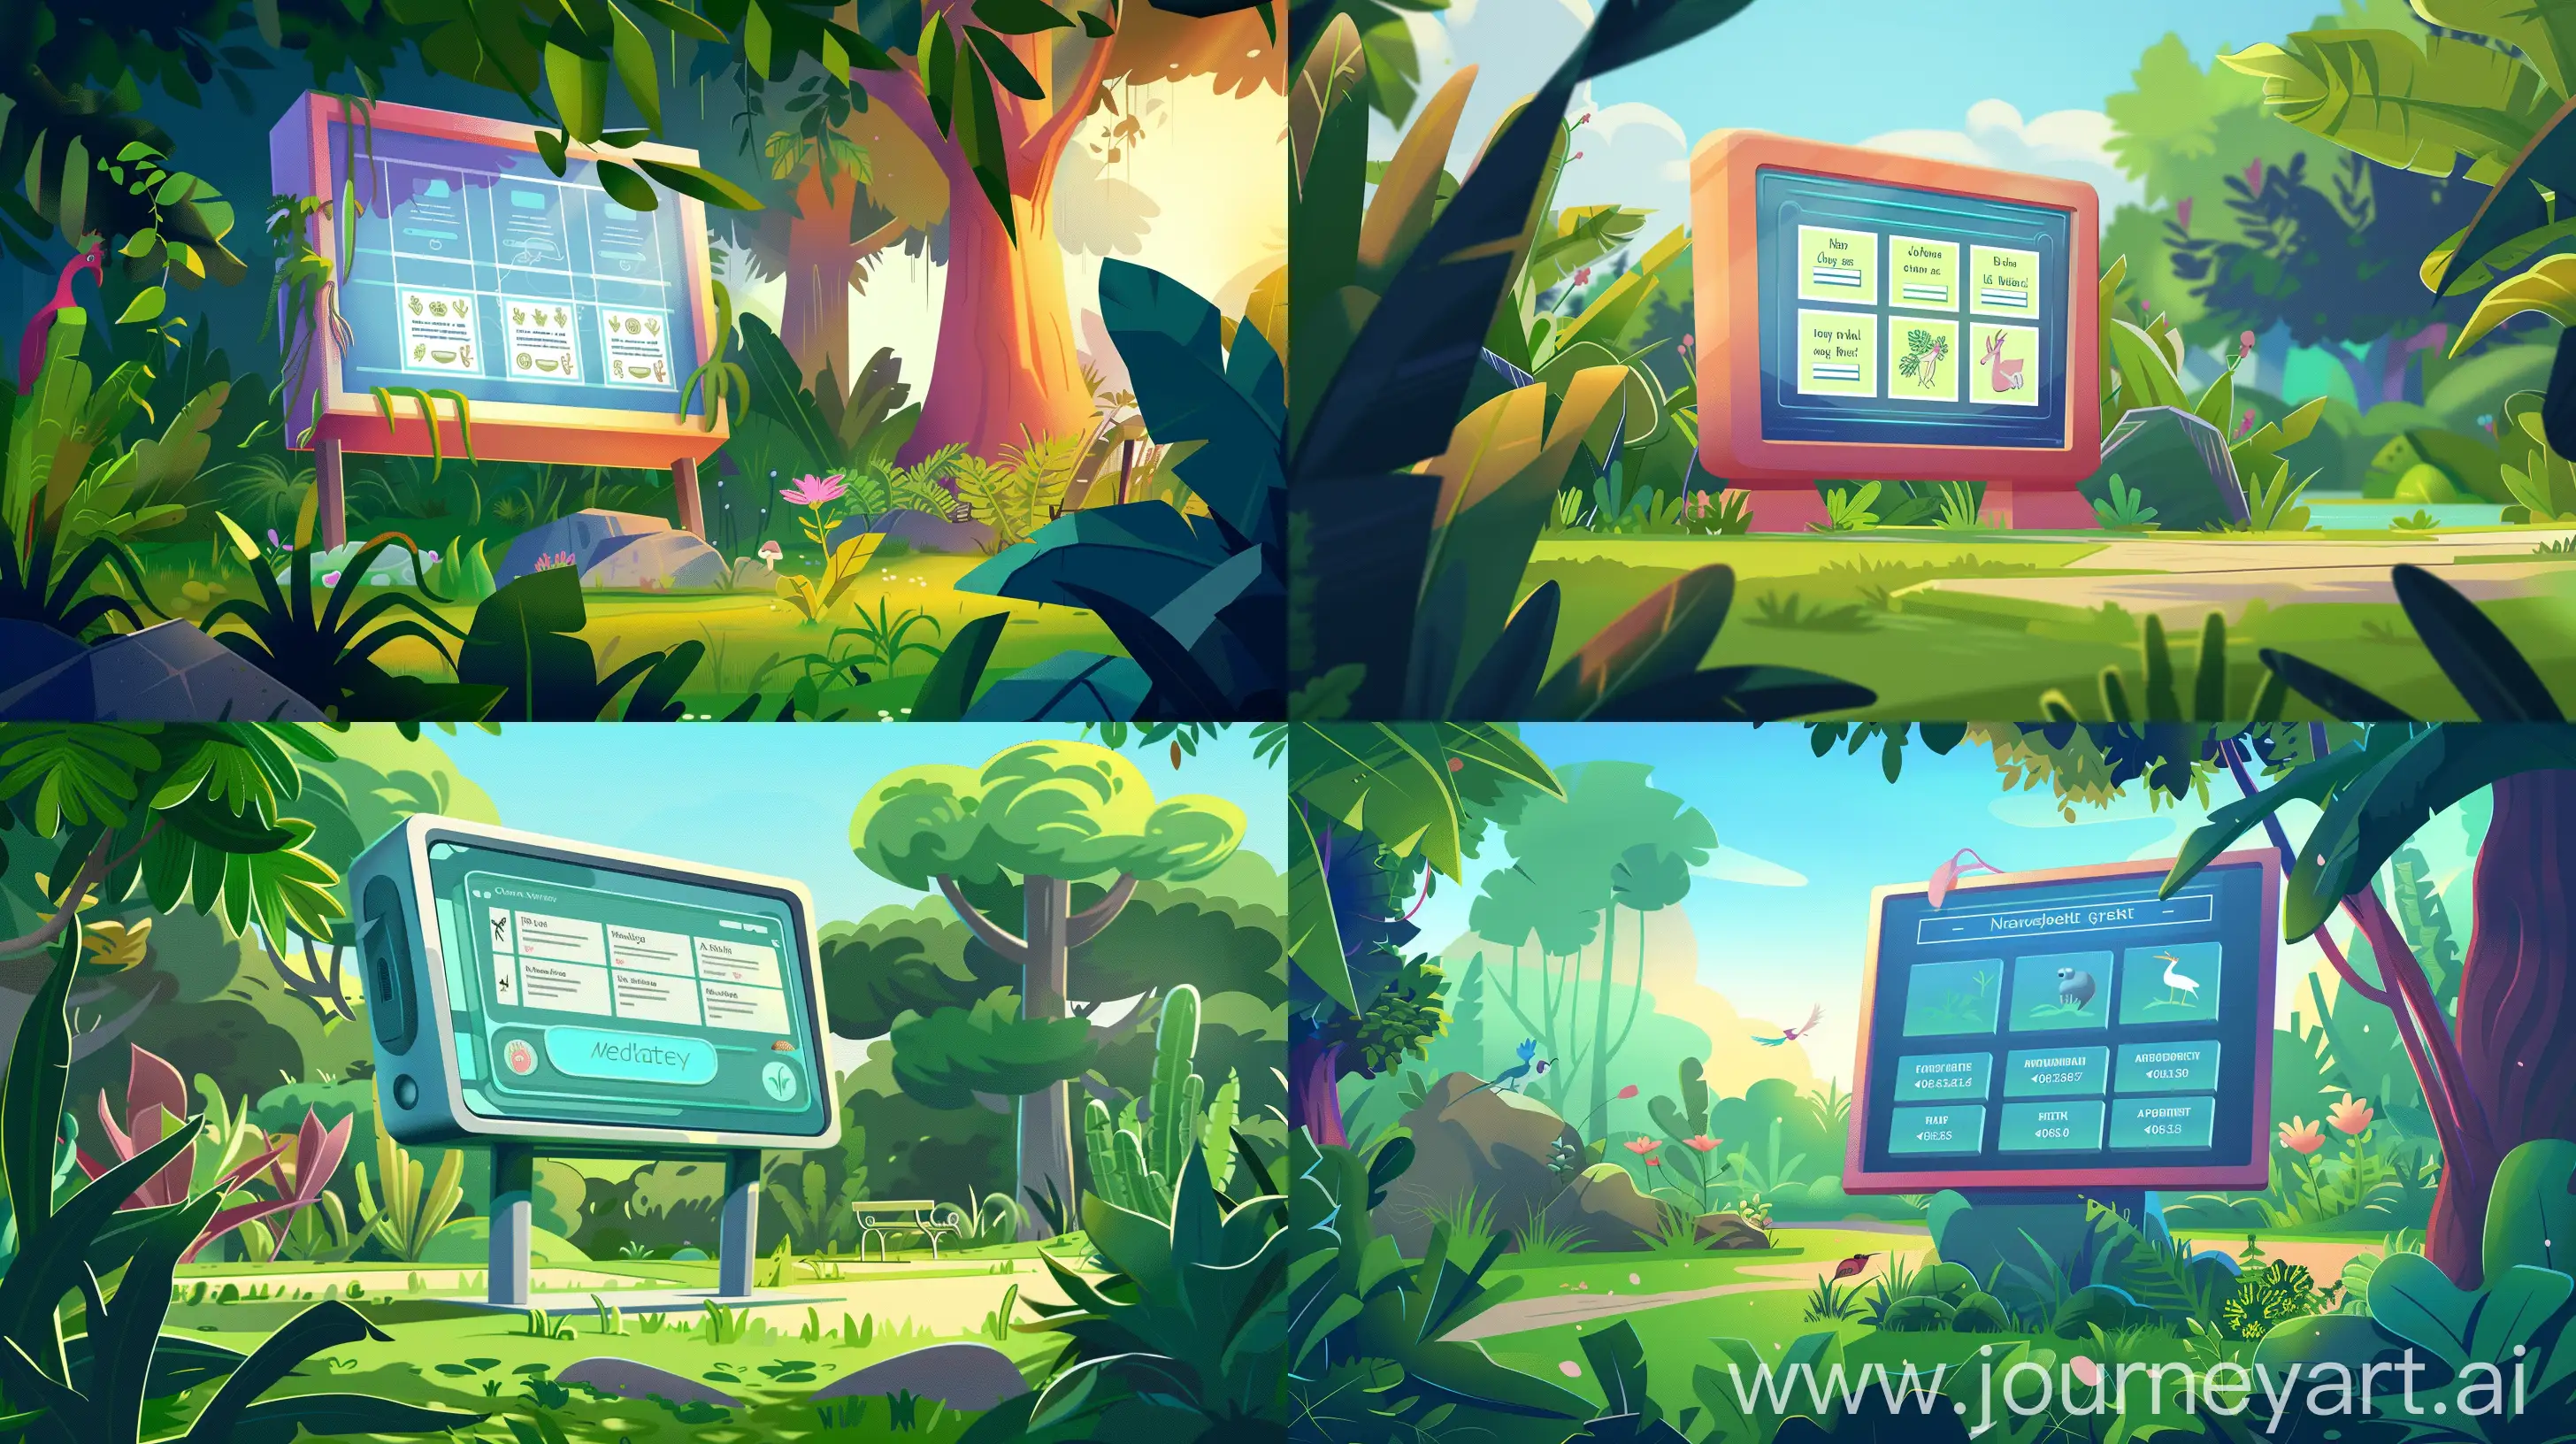 Naturethemed-Quiz-Game-Interface-in-Vibrant-Park-Setting